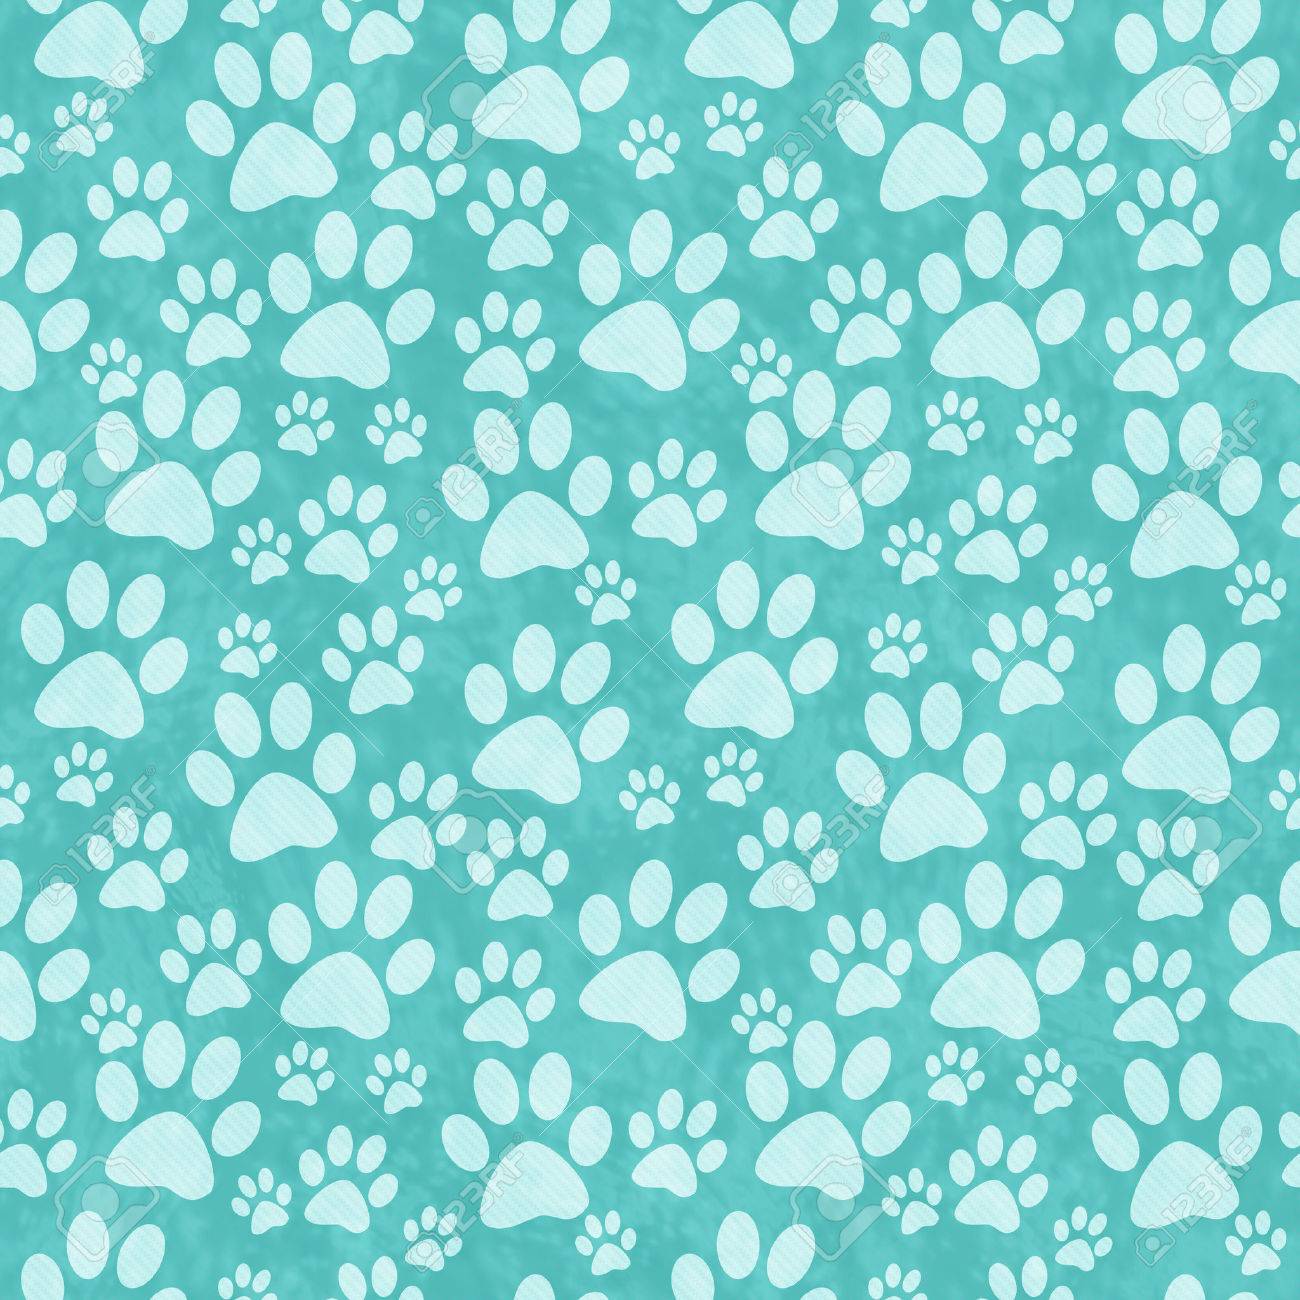 Teal Doggy Paw Print Tile Pattern Repeat Background That Is